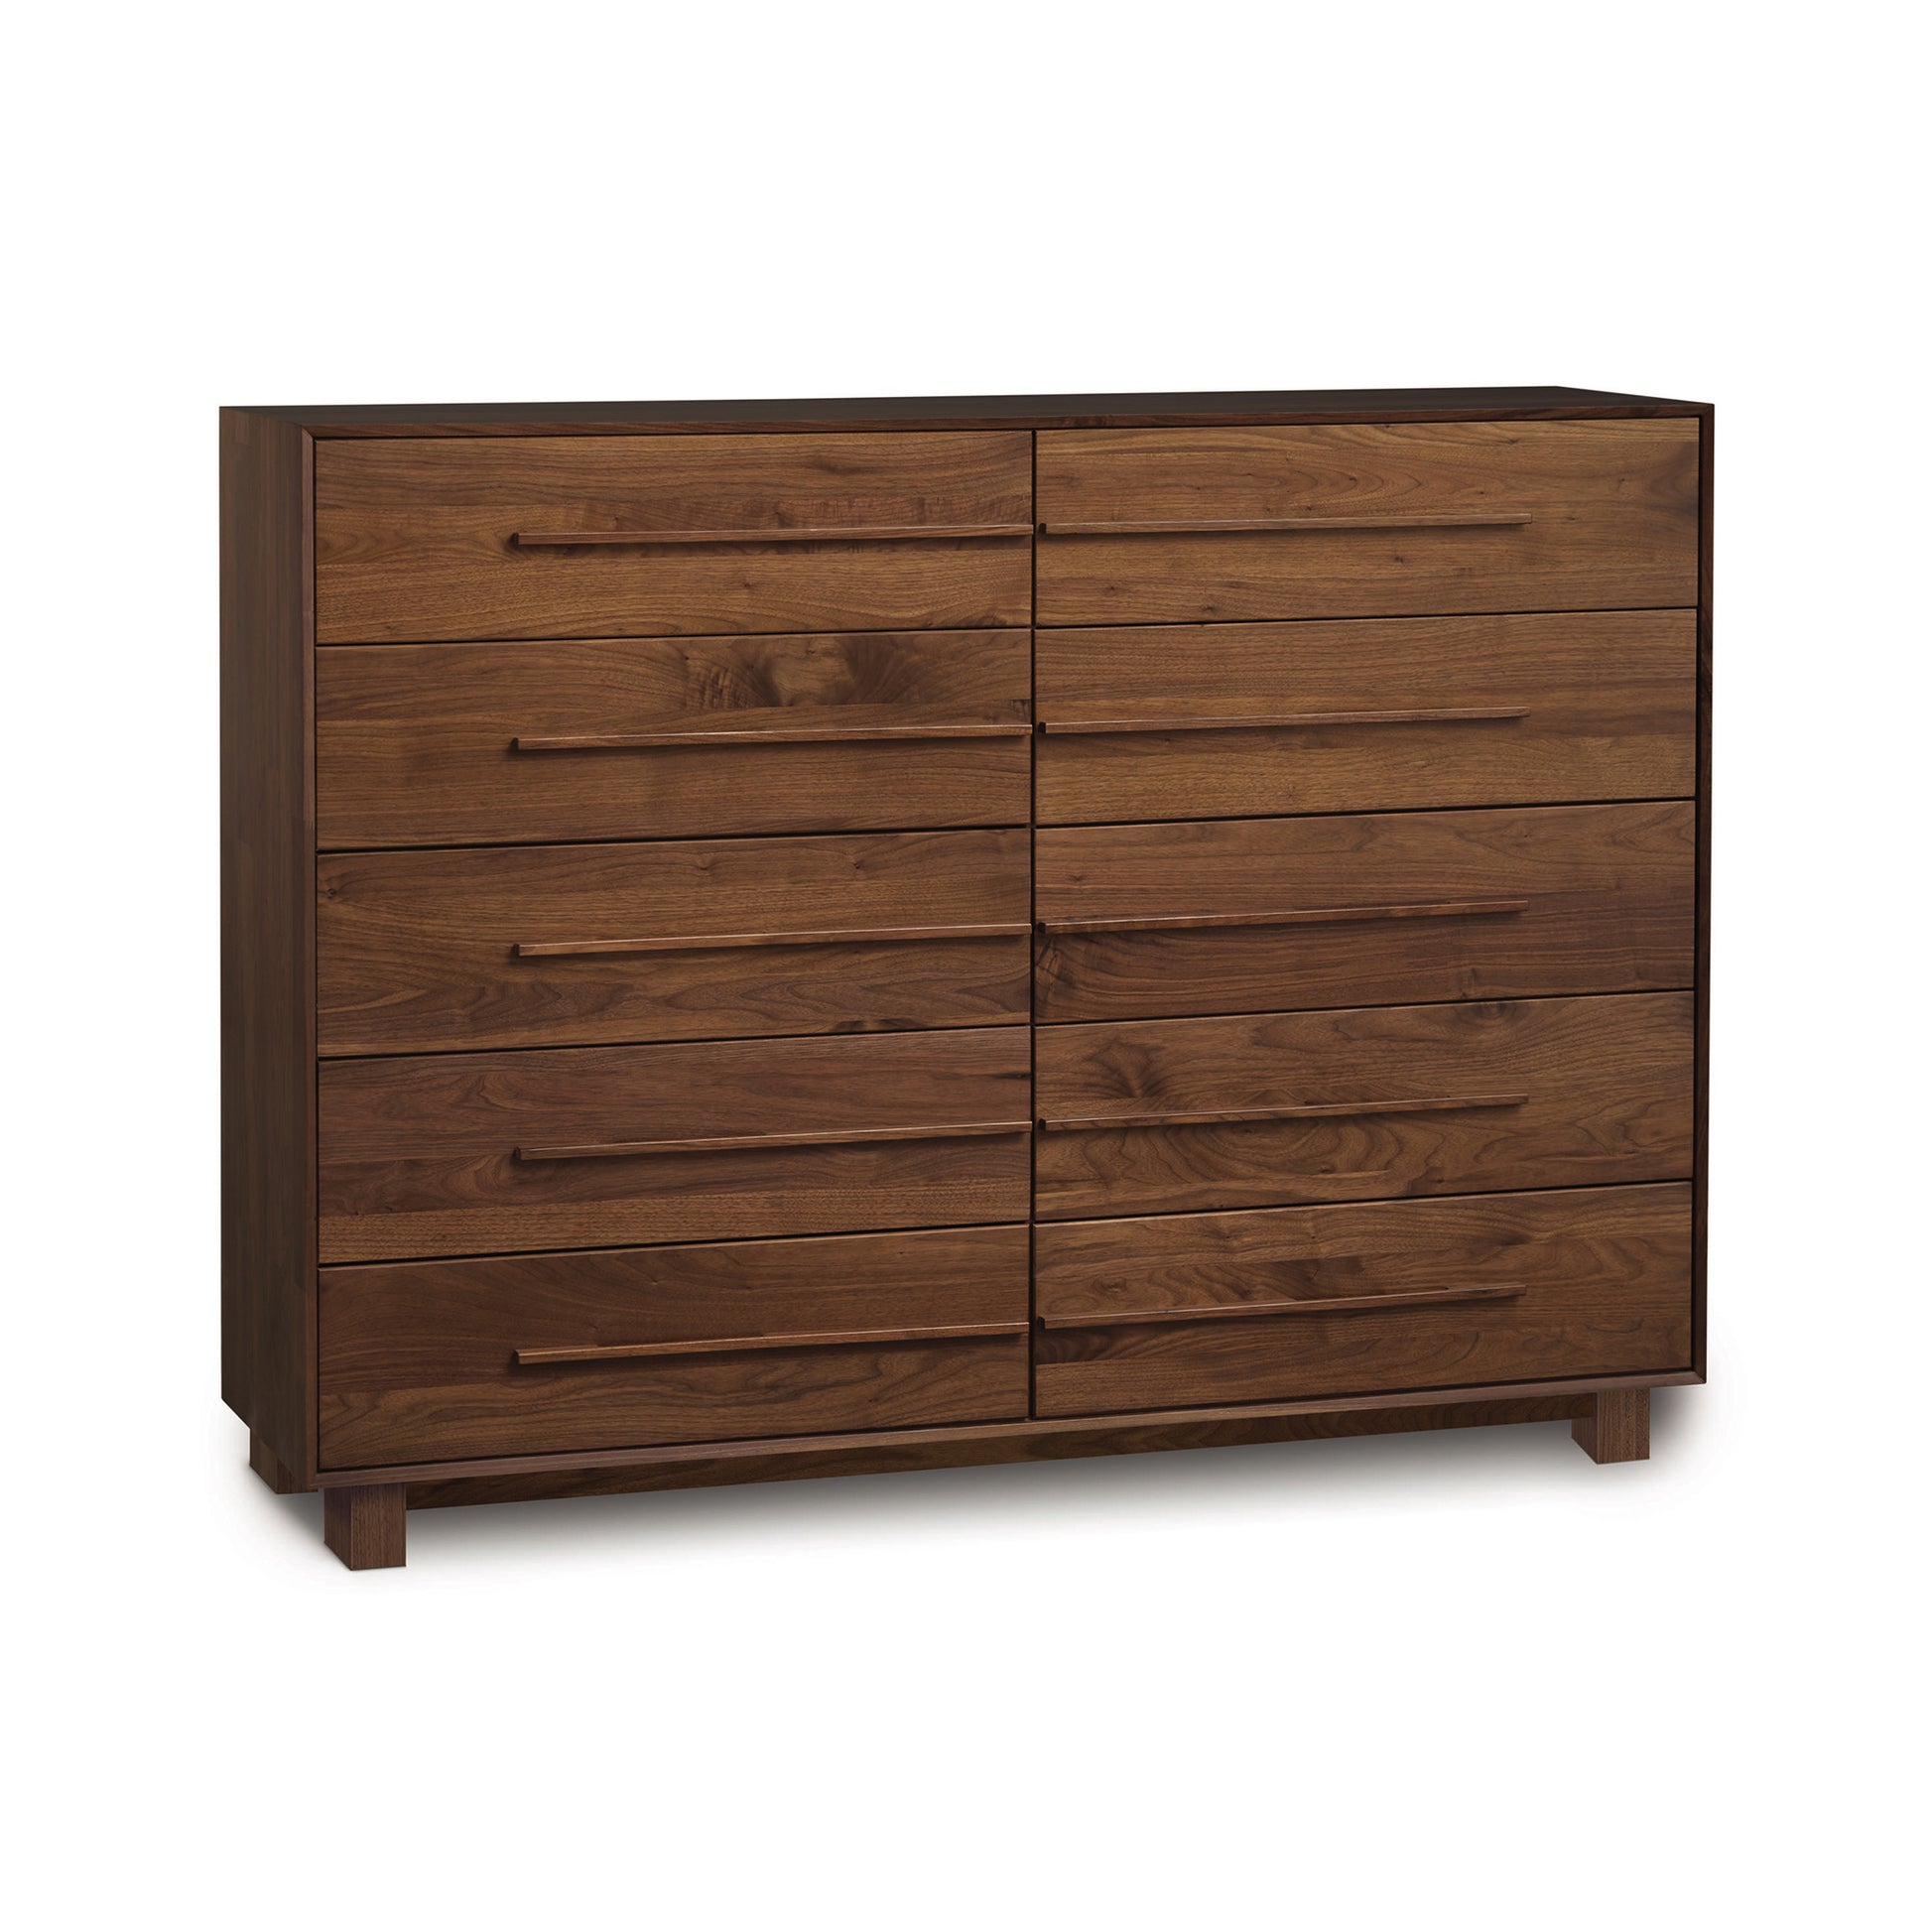 The Copeland Furniture Sloane 10-Drawer Dresser is a contemporary wooden dresser offering ample bedroom storage with its multiple drawers.